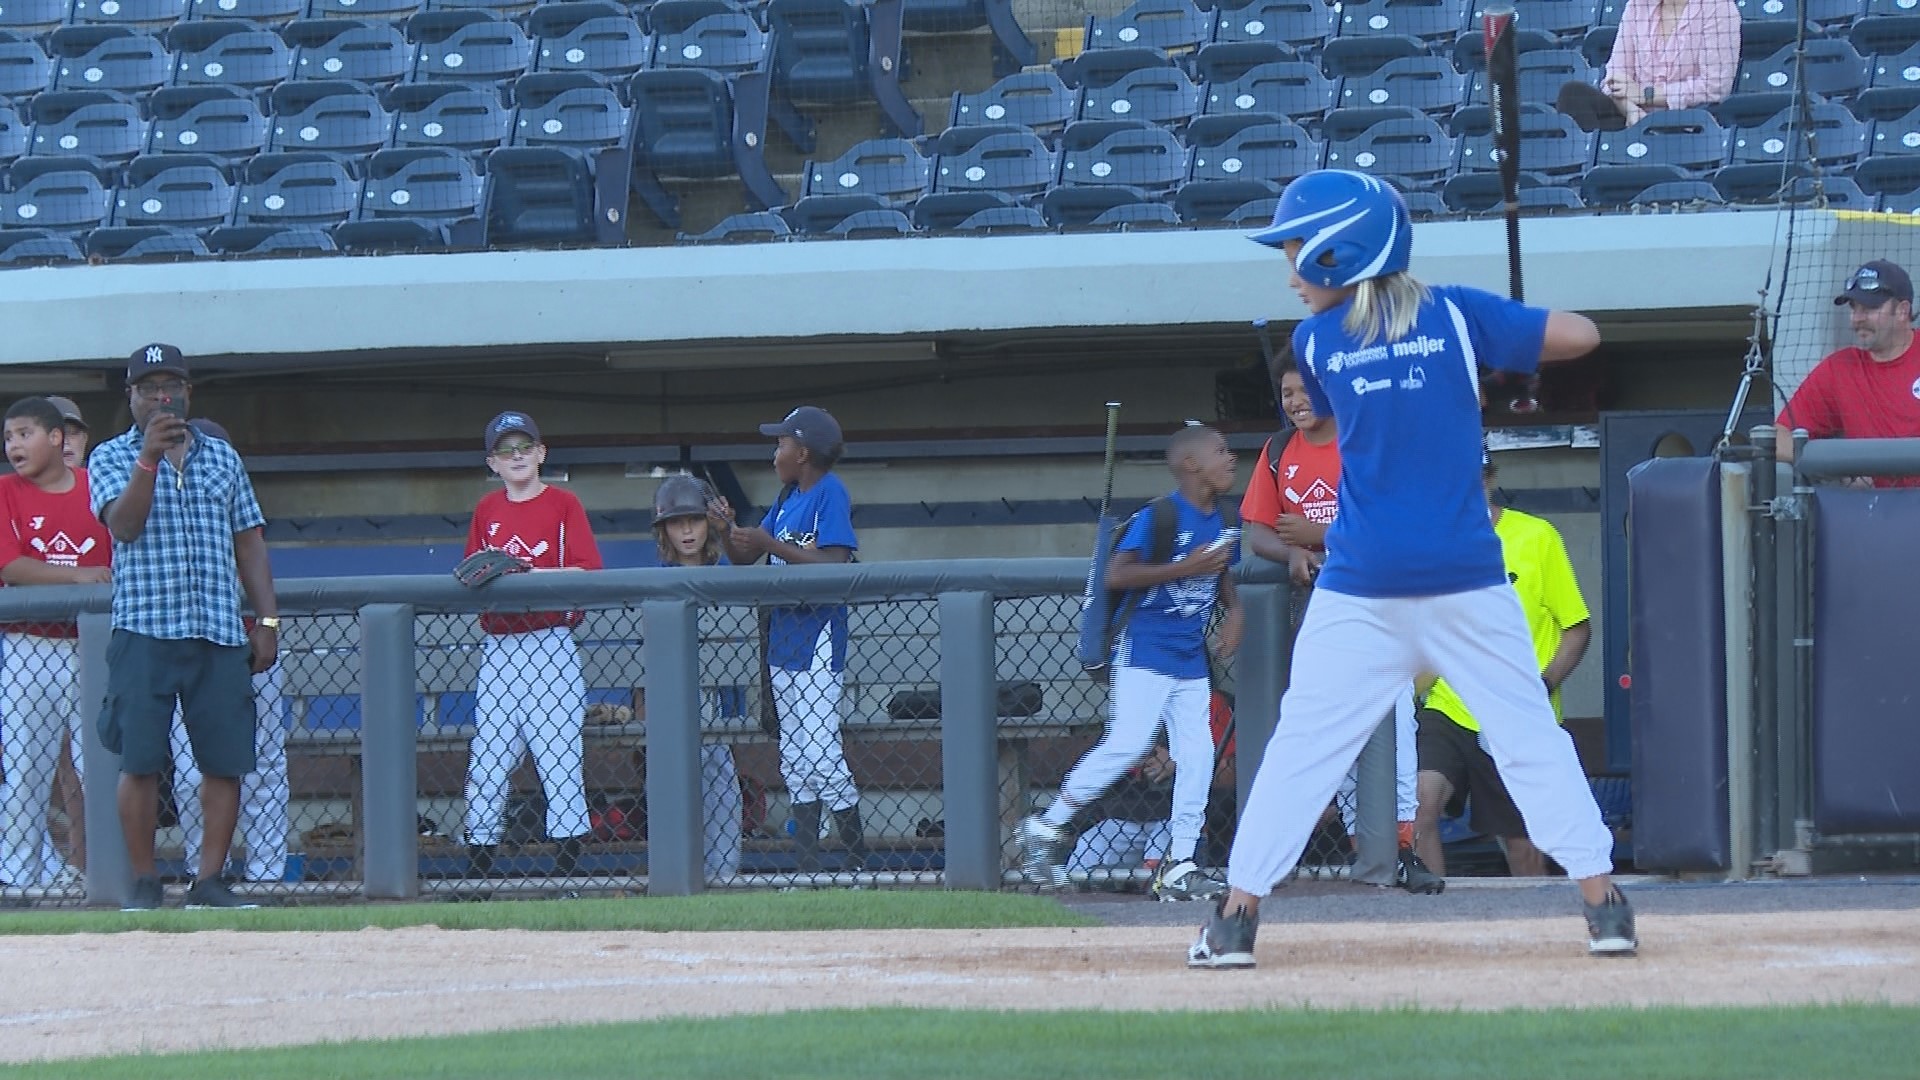 It was a night that many young baseball and softball players won't ever forget, as LMCU Ballpark became their field of dreams on Thursday evening.